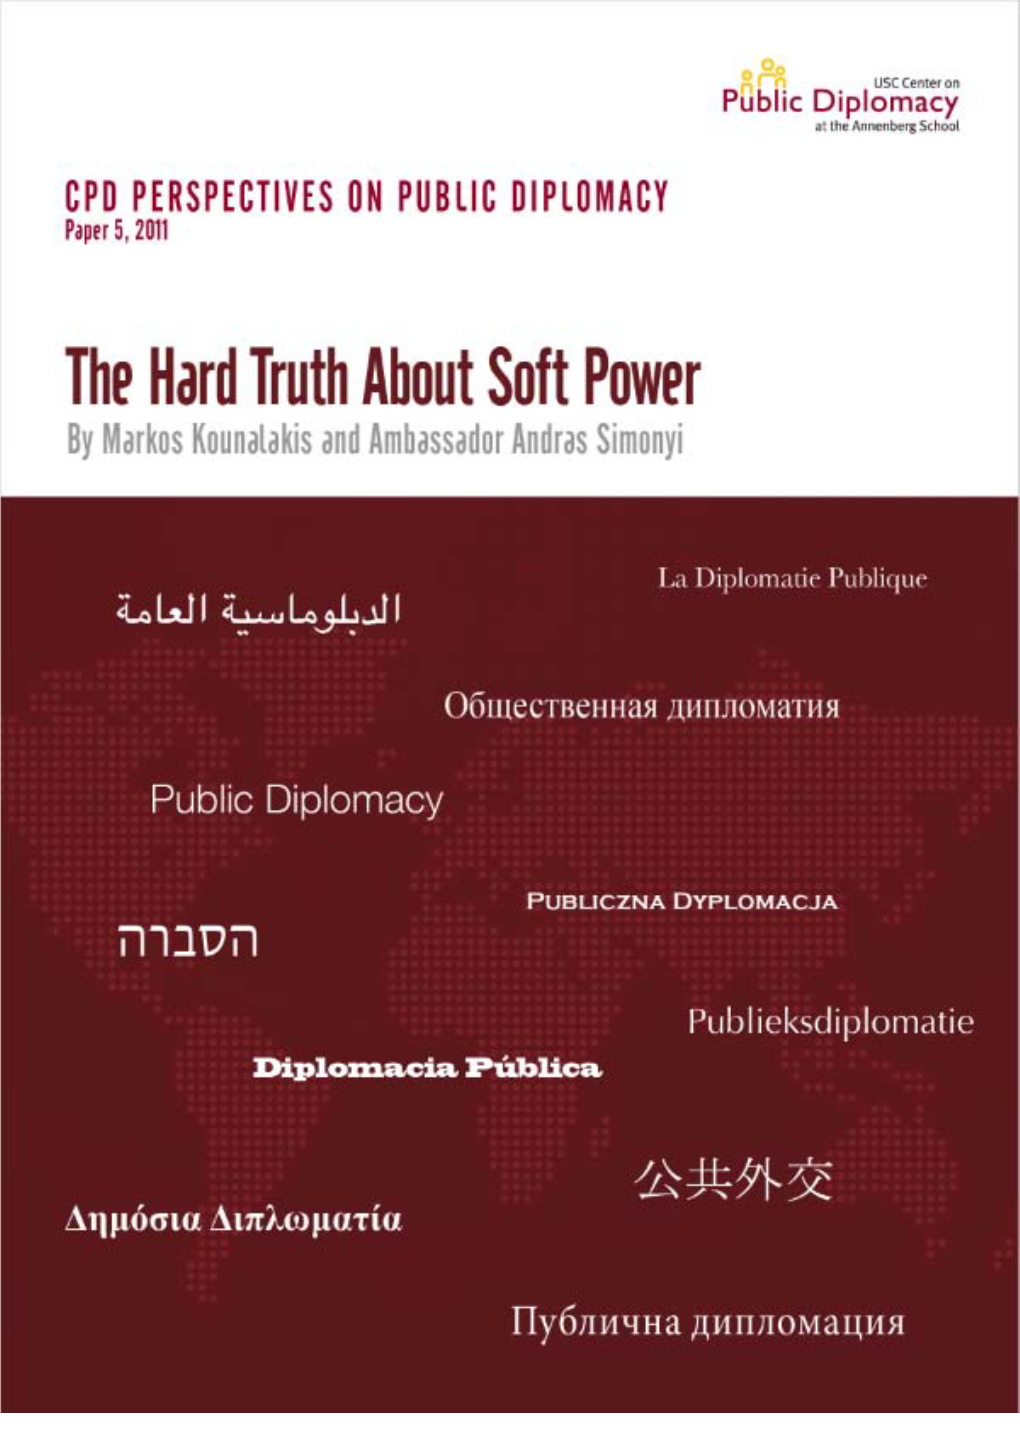 The Hard Truth About Soft Power